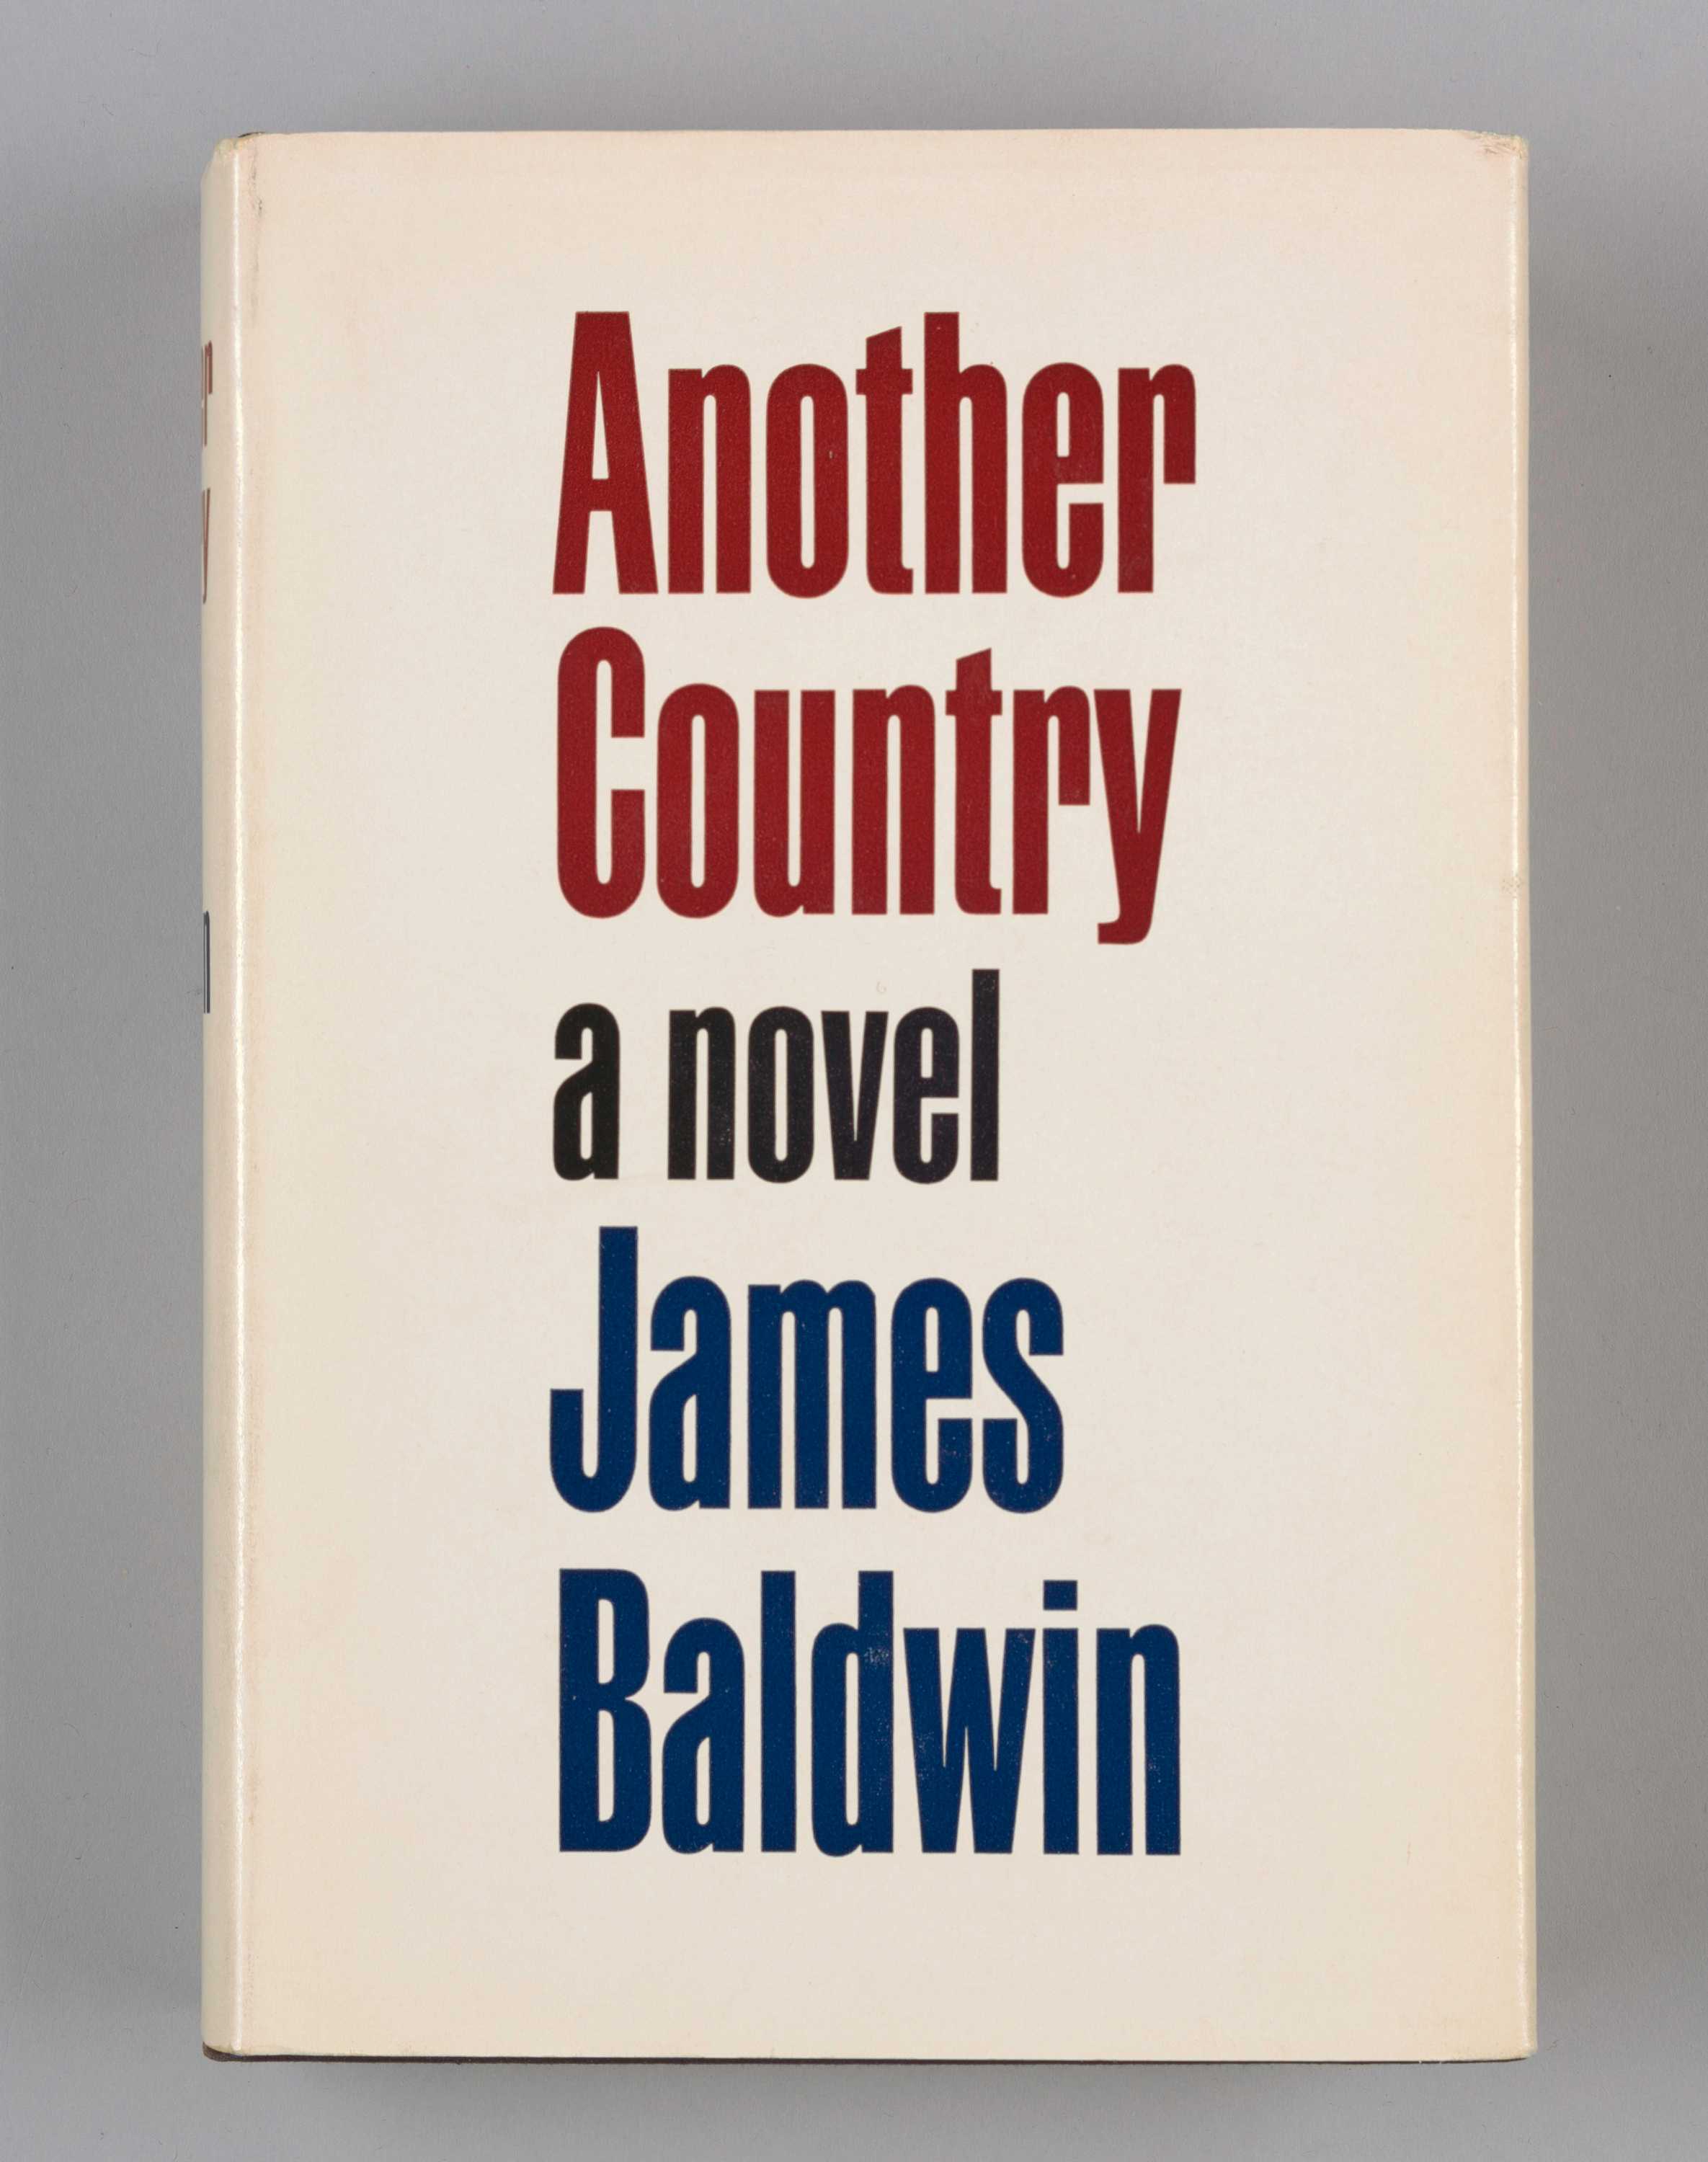 A hardback book titled Another Country by James Baldwin. The exterior has a paper book cover and a clear plastic book cover over that. The paper book cover is off-white with red text, centered, that reads: [Another / Country] and dark blue type, centered, that reads: [a novel / James / Baldwin] in large font on the front cover. The binding, in same color scheme, reads: [Another / Country / James / Baldwin / Dial]. The back cover of the paper sleeve, bordered by solid red line, has text in black and red type that gives a bulleted-list synopsis of eight characters in the book. The front interior of paper sleeve gives a synopsis of the book, while the back interior of the paper sleeve has a black-and-white depiction of James Baldwin and gives information, in black type, about his life and career. Hardback cover itself is black with white type and red on interior front and back covers. On the inside cover there is a white sticker that in black print reads: [From the Library of Albert Tsugawa]. The interior pages, 436 in total, are off-white paper with black type.